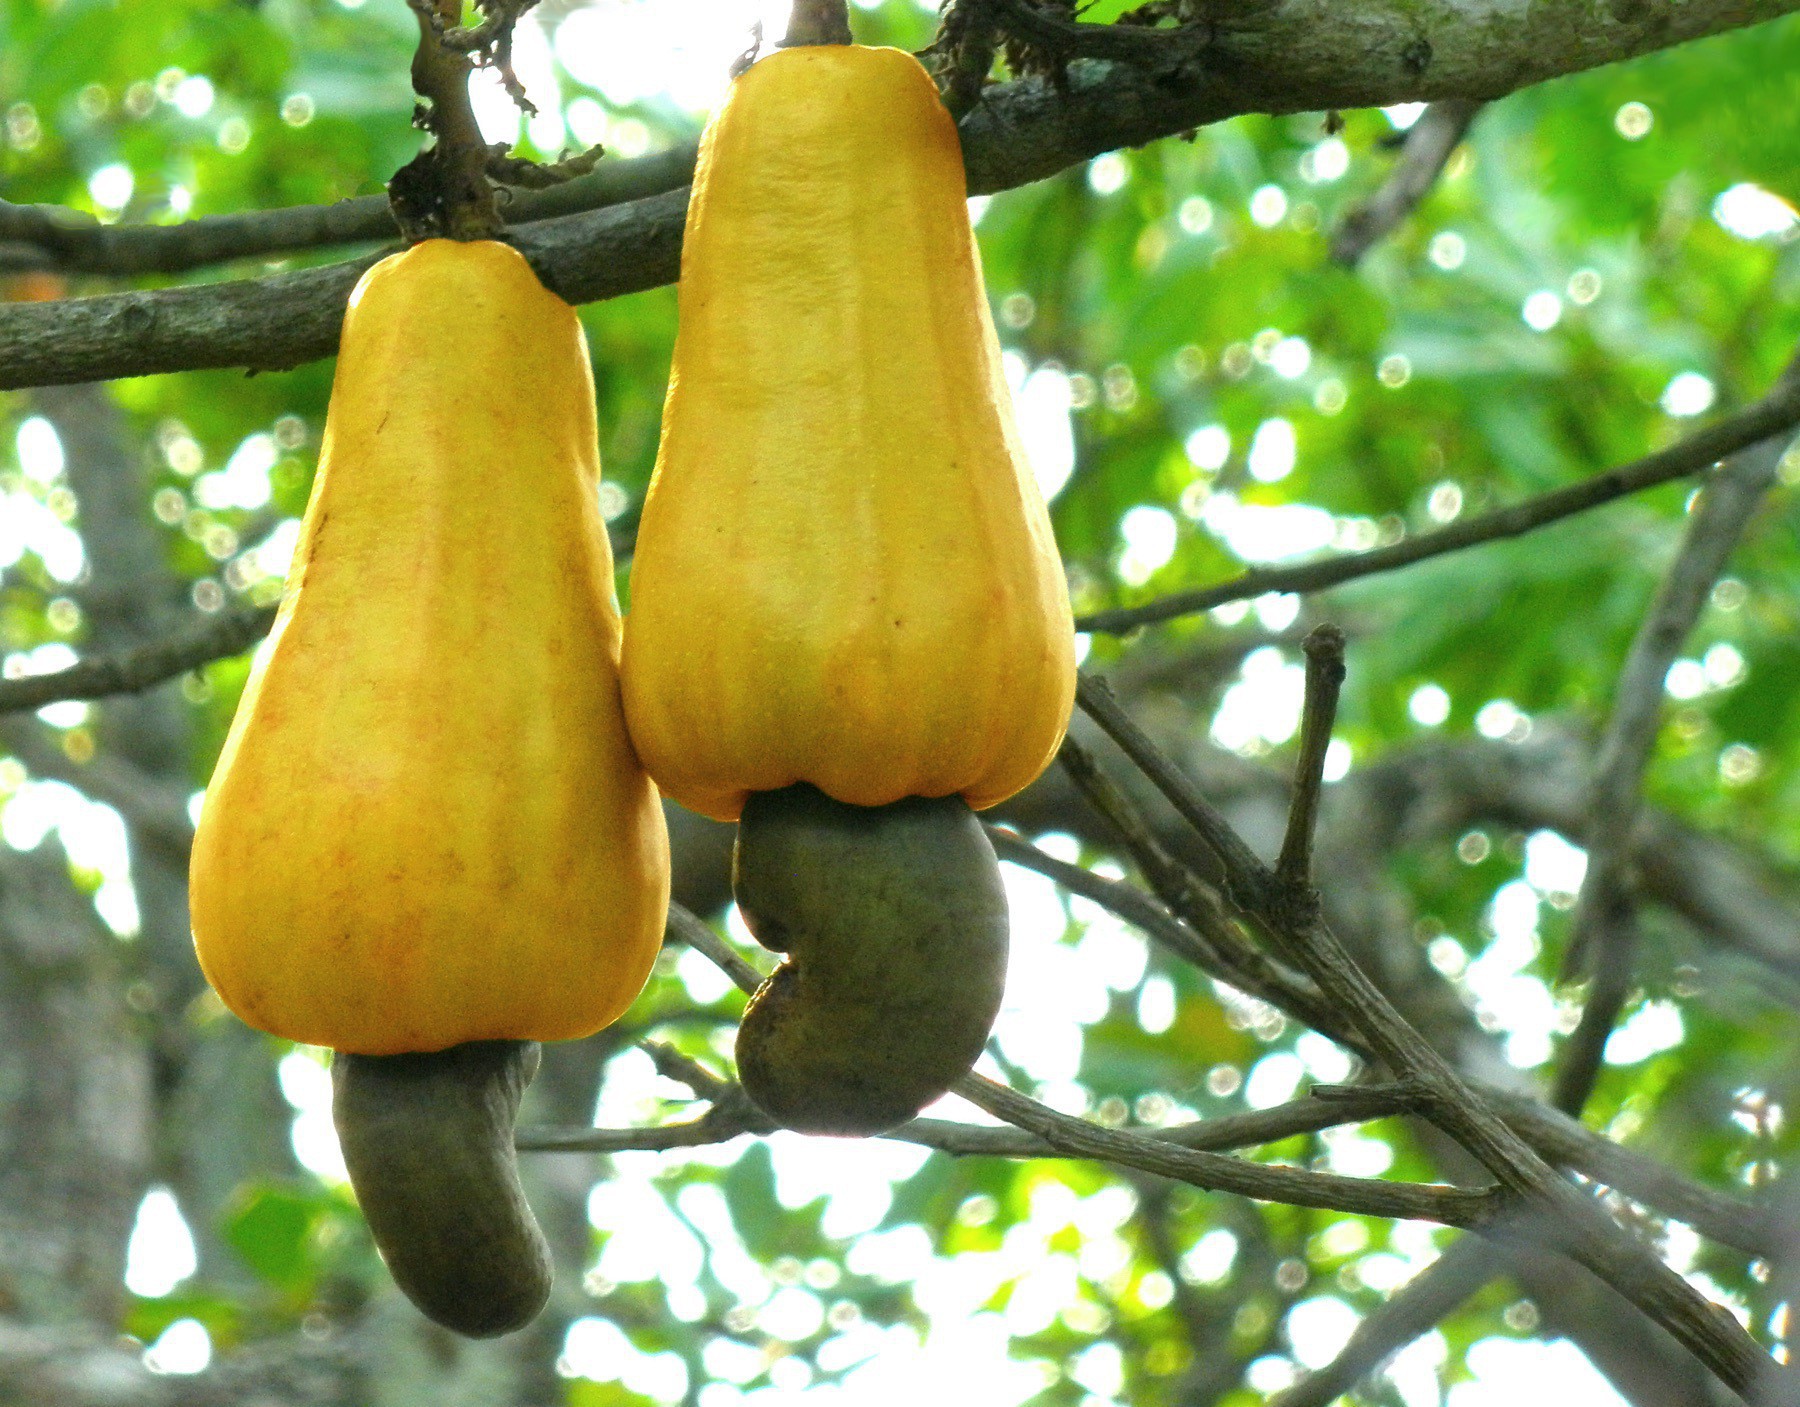 Two cashew apples, which are yellow and look like small a small squash. The nut and shell hang down from the bottom of the apple.